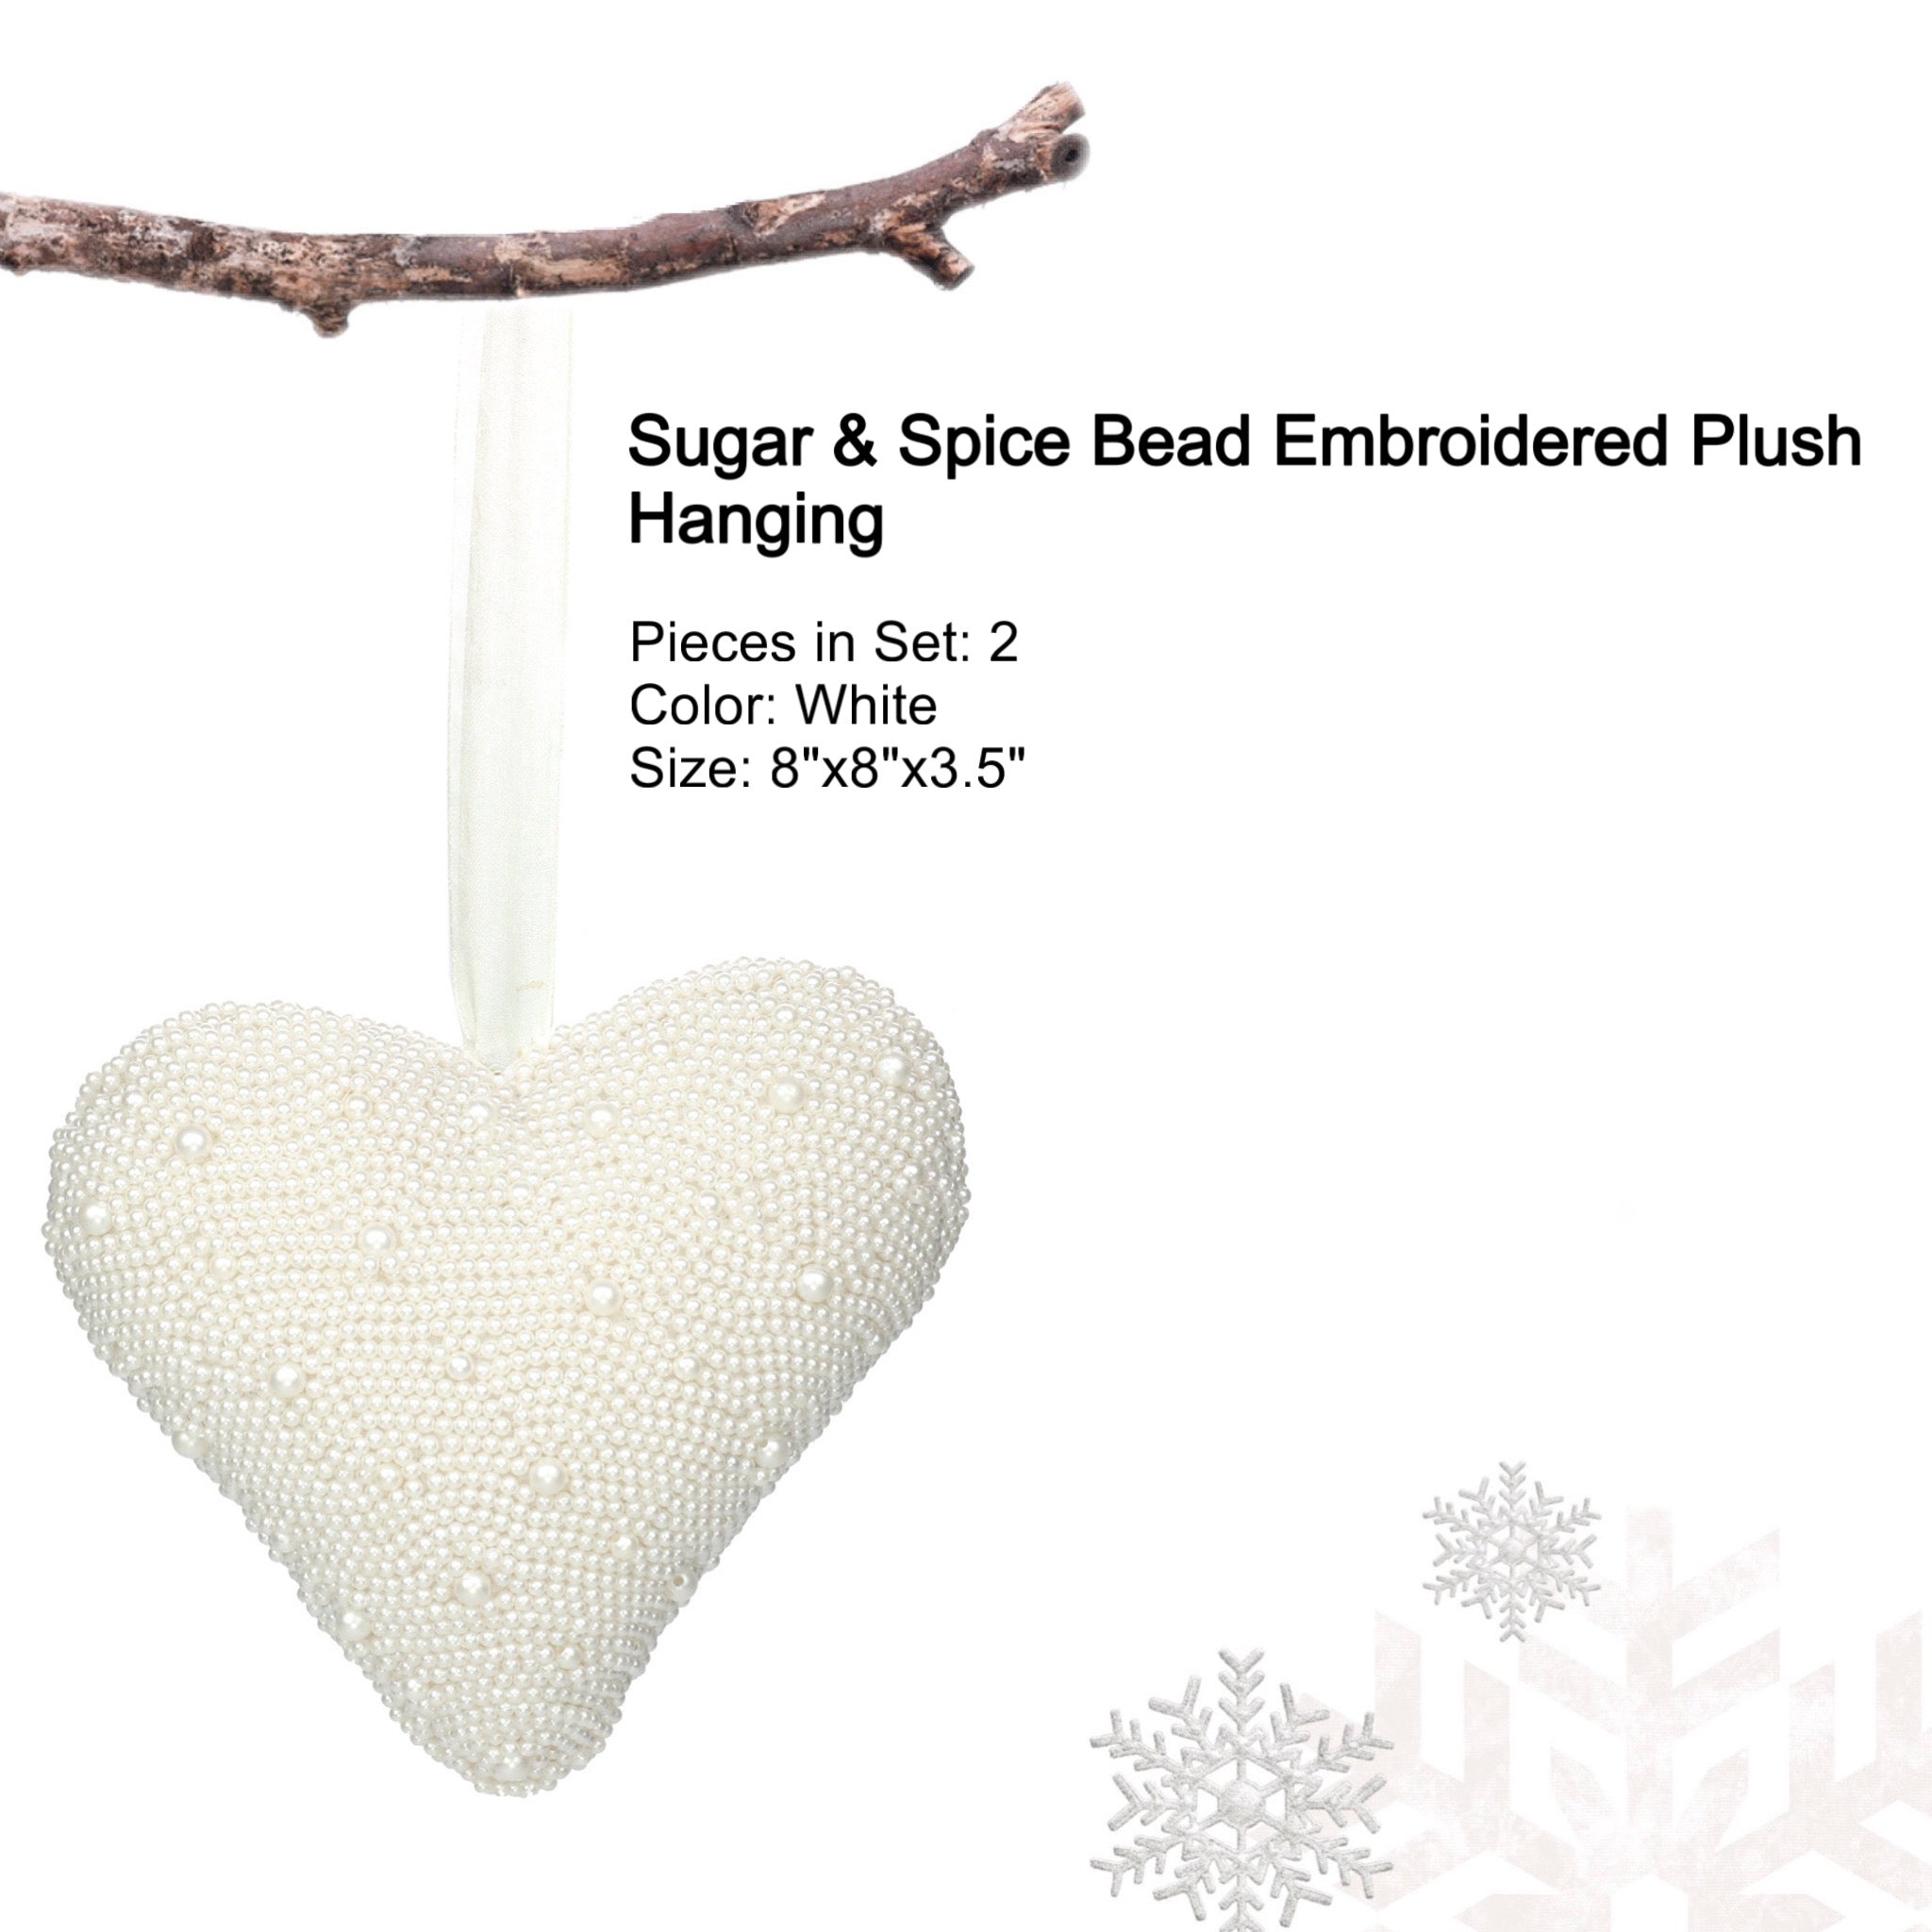 Sugar & Spice Bead Embroidered Plush Hanging in White, Set of 2